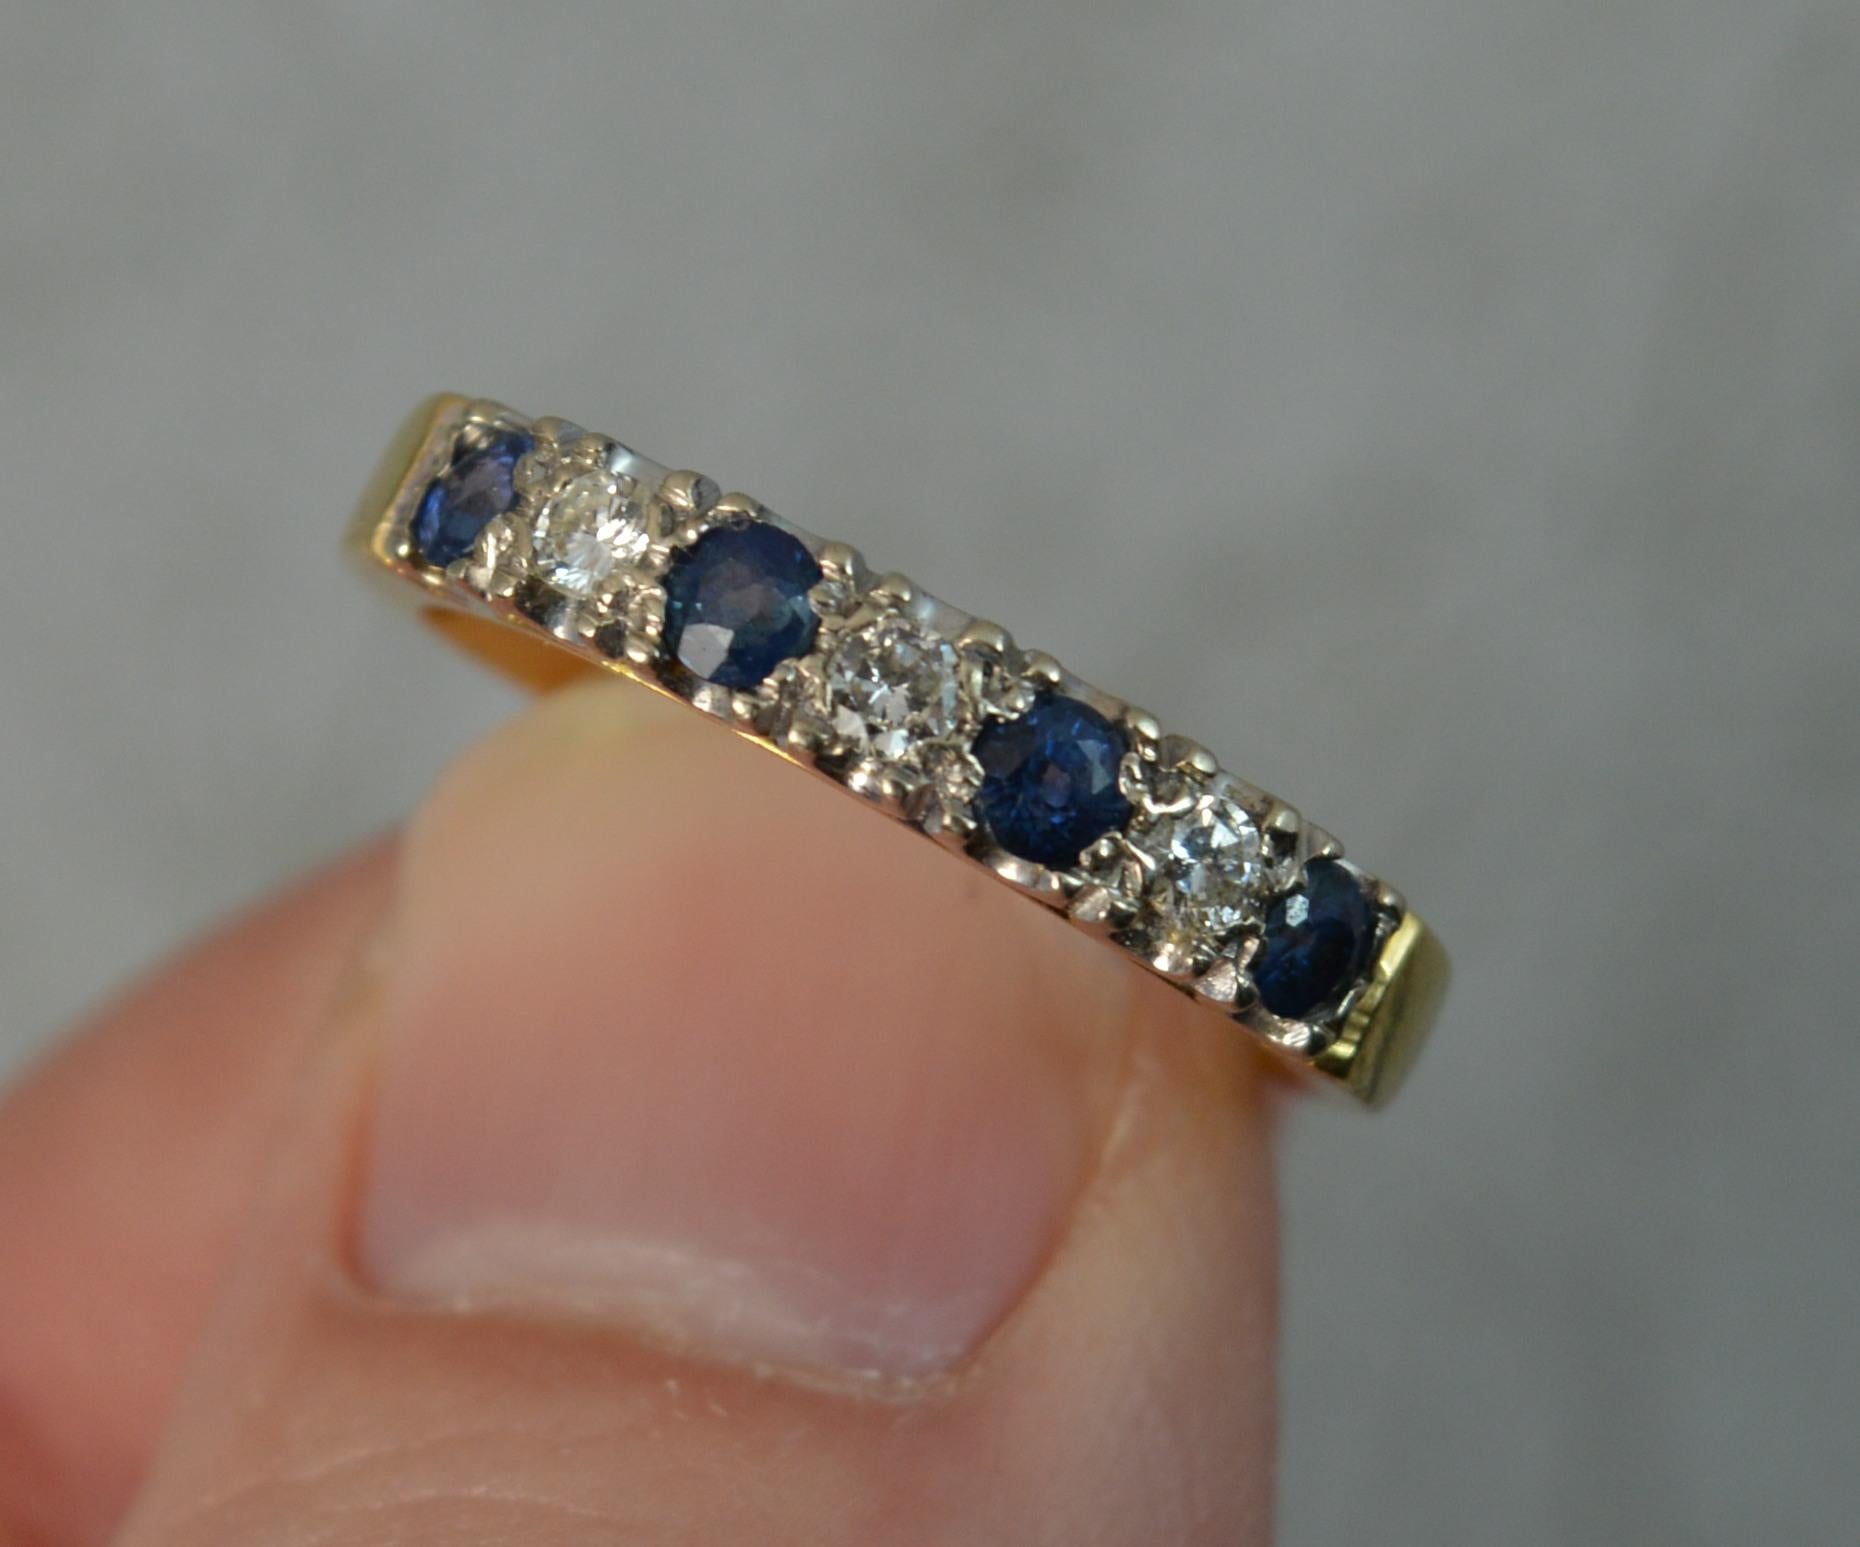 A beautiful Sapphire and Diamond ring.
Solid 18 carat yellow gold example.
Designed with alternating round brilliant cut blue sapphires and diamonds in grain settings. Suitable for wearing alongside other rings.
18mm spread of stones. 3.5mm wide